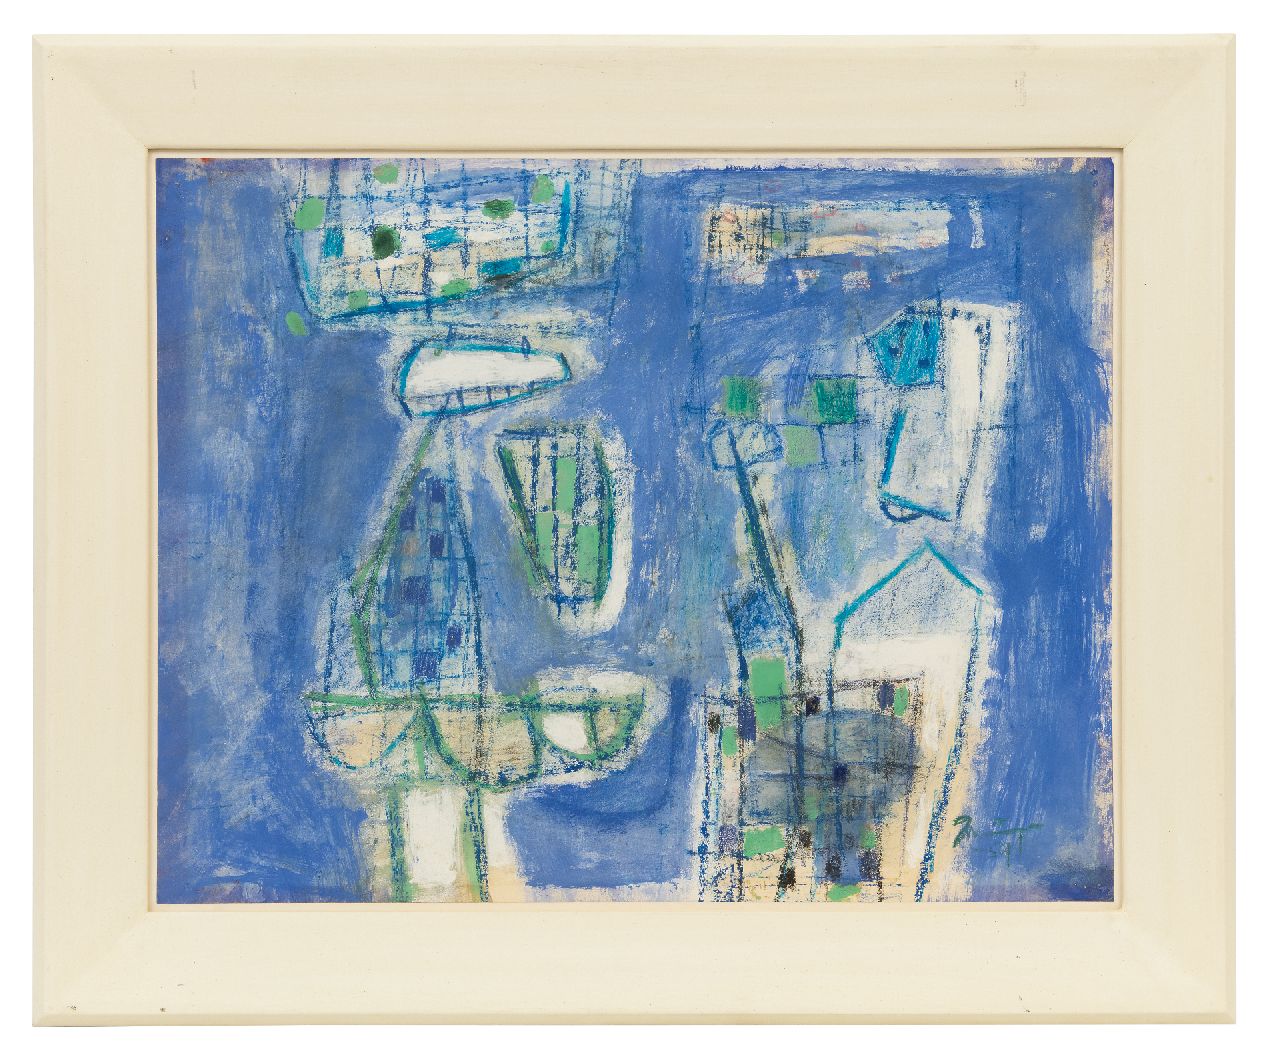 Nanninga J.  | Jacob 'Jaap' Nanninga | Watercolours and drawings offered for sale | Composition on a blue background, gouache and chalk on paper 48.0 x 61.5 cm, signed l.r. and dated '59